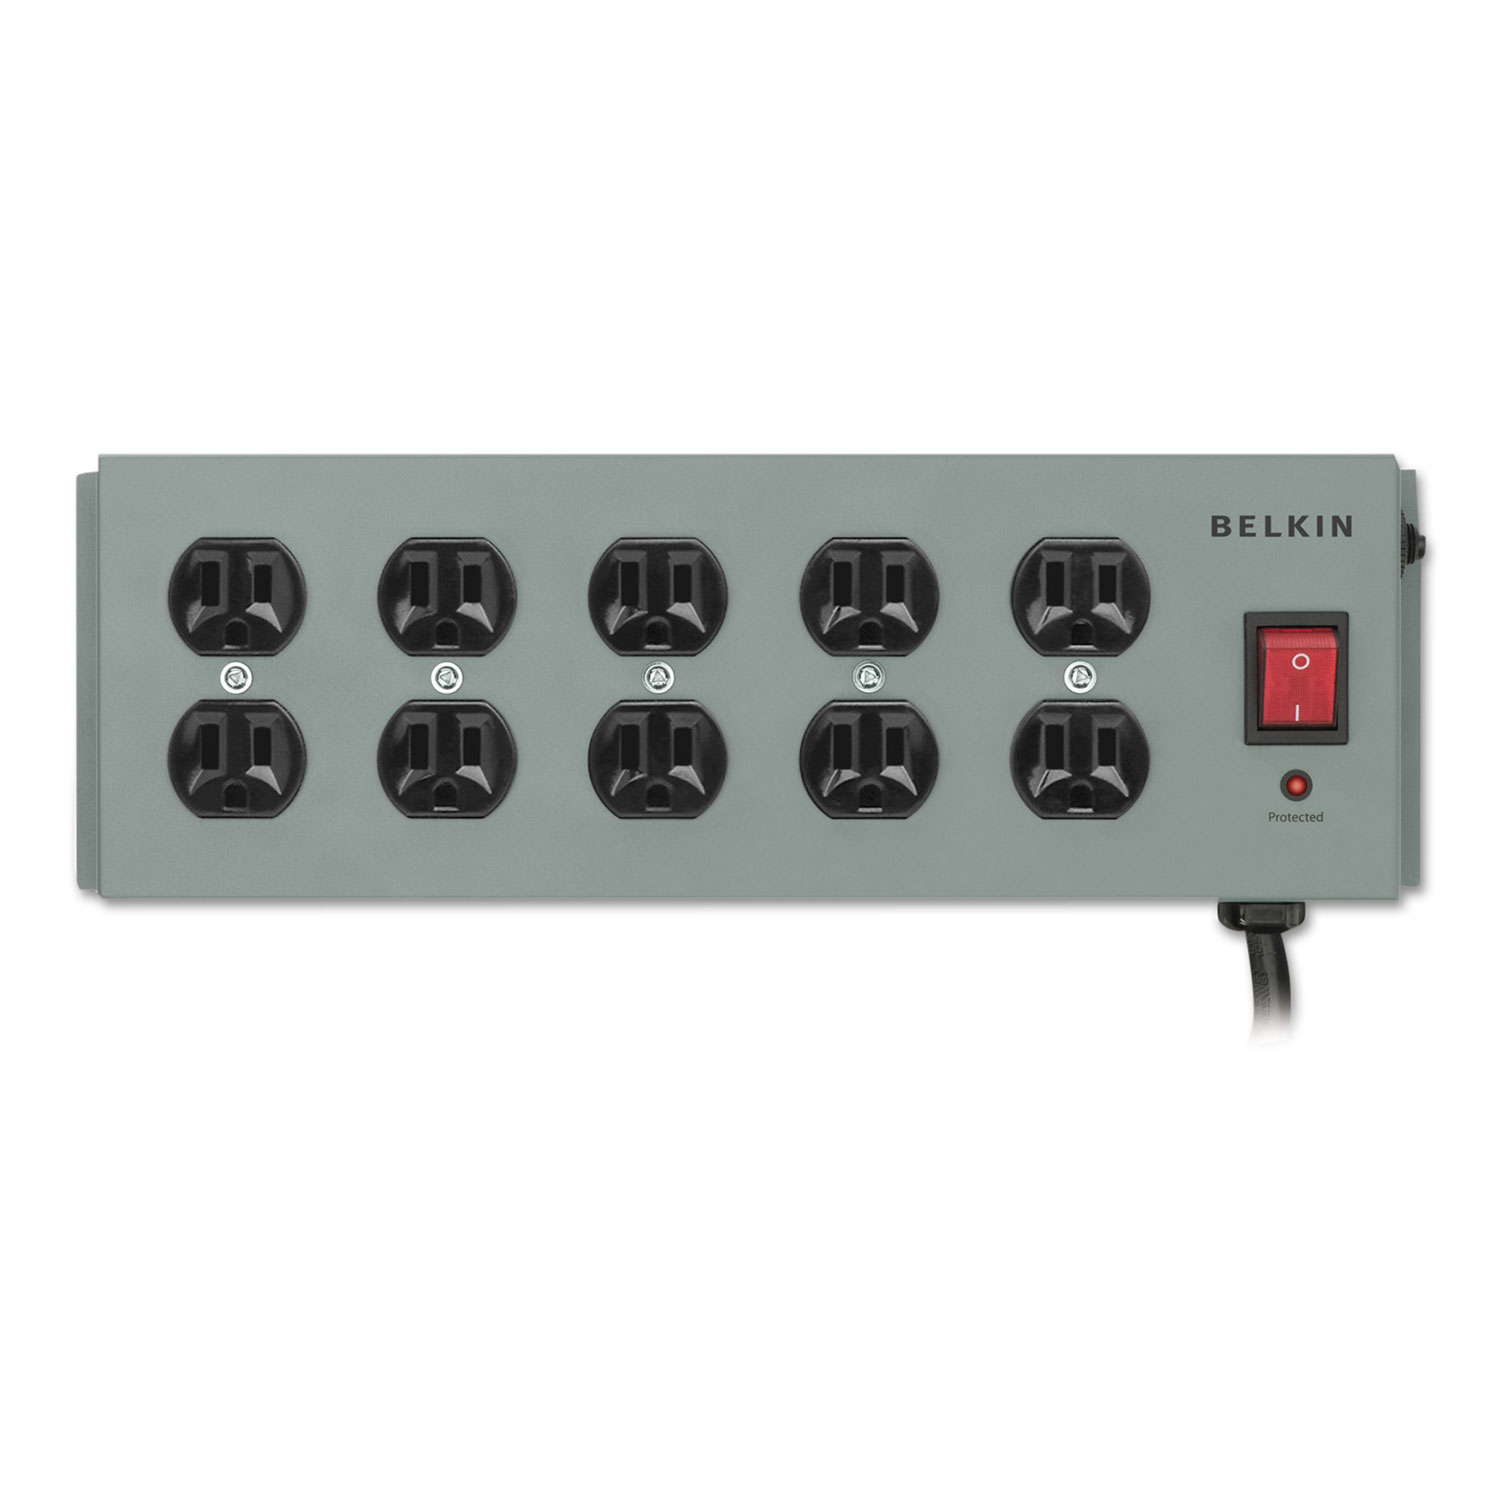 Metal SurgeMaster Surge Protector, 10 Outlets, 15 ft Cord, 885 Joules, Dark Gray